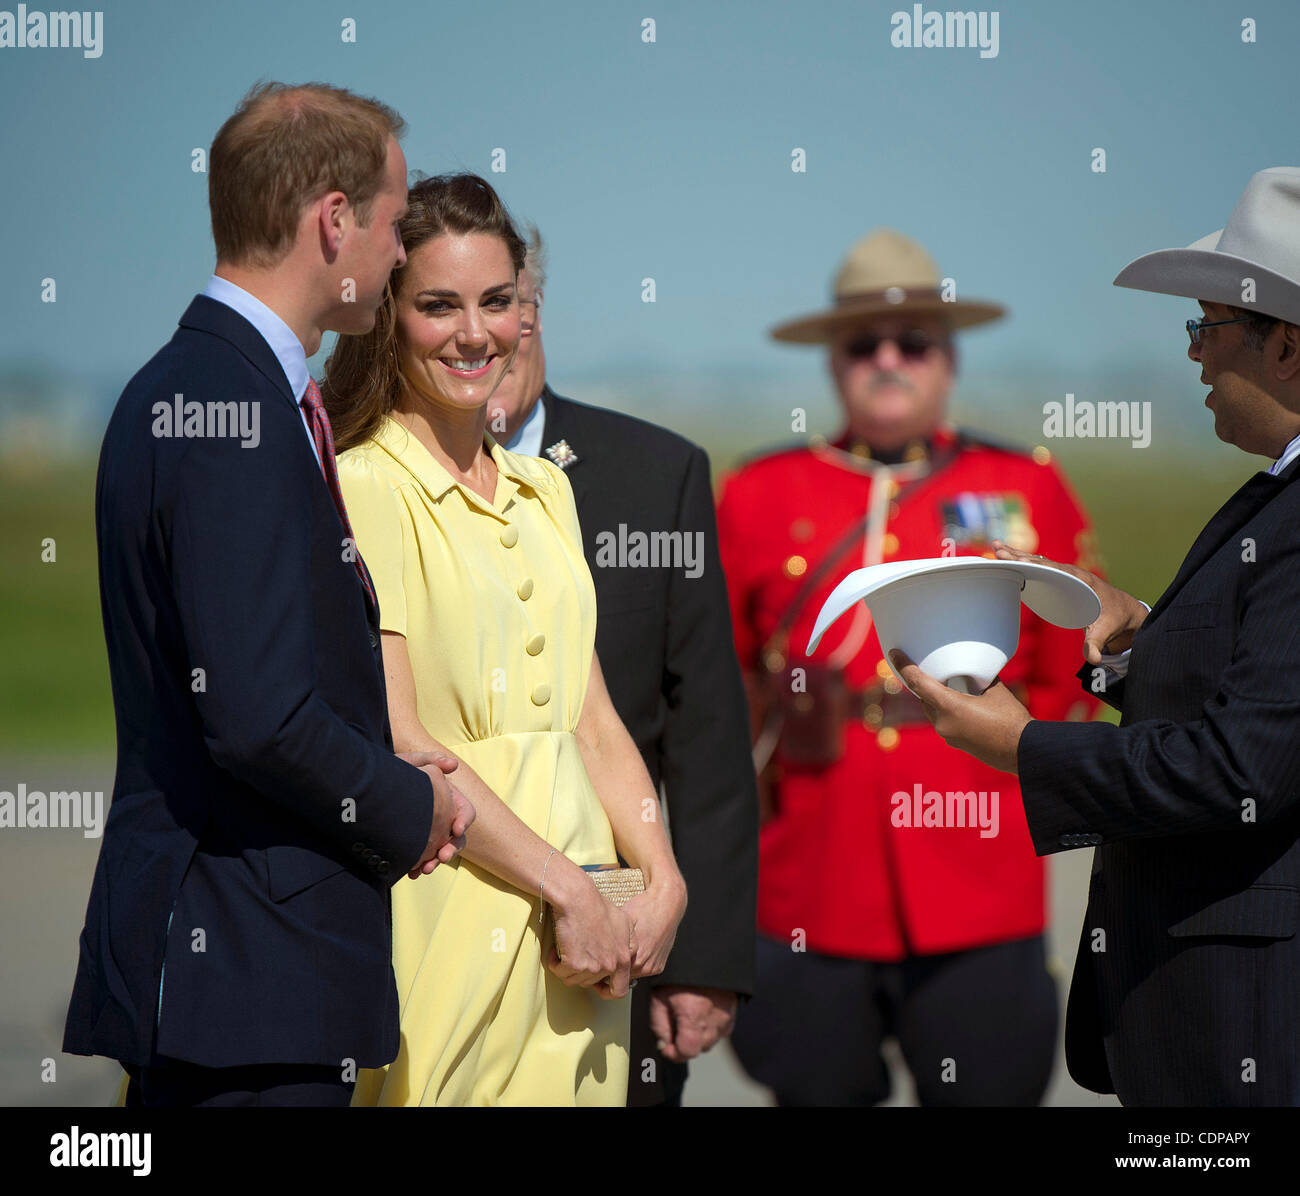 July 7, 2011 - Calgary, Alberta, Canada - Prince William and Catherine Middleton, Duchess of Cambridge, are greeted with white cowboy hats by Calgary Mayor Nenshi, as they arrive in Calgary. Calgary is the last Canadian stop of the British Royal Tour. Photo by Jimmy Jeong / Rogue Collective Stock Photo